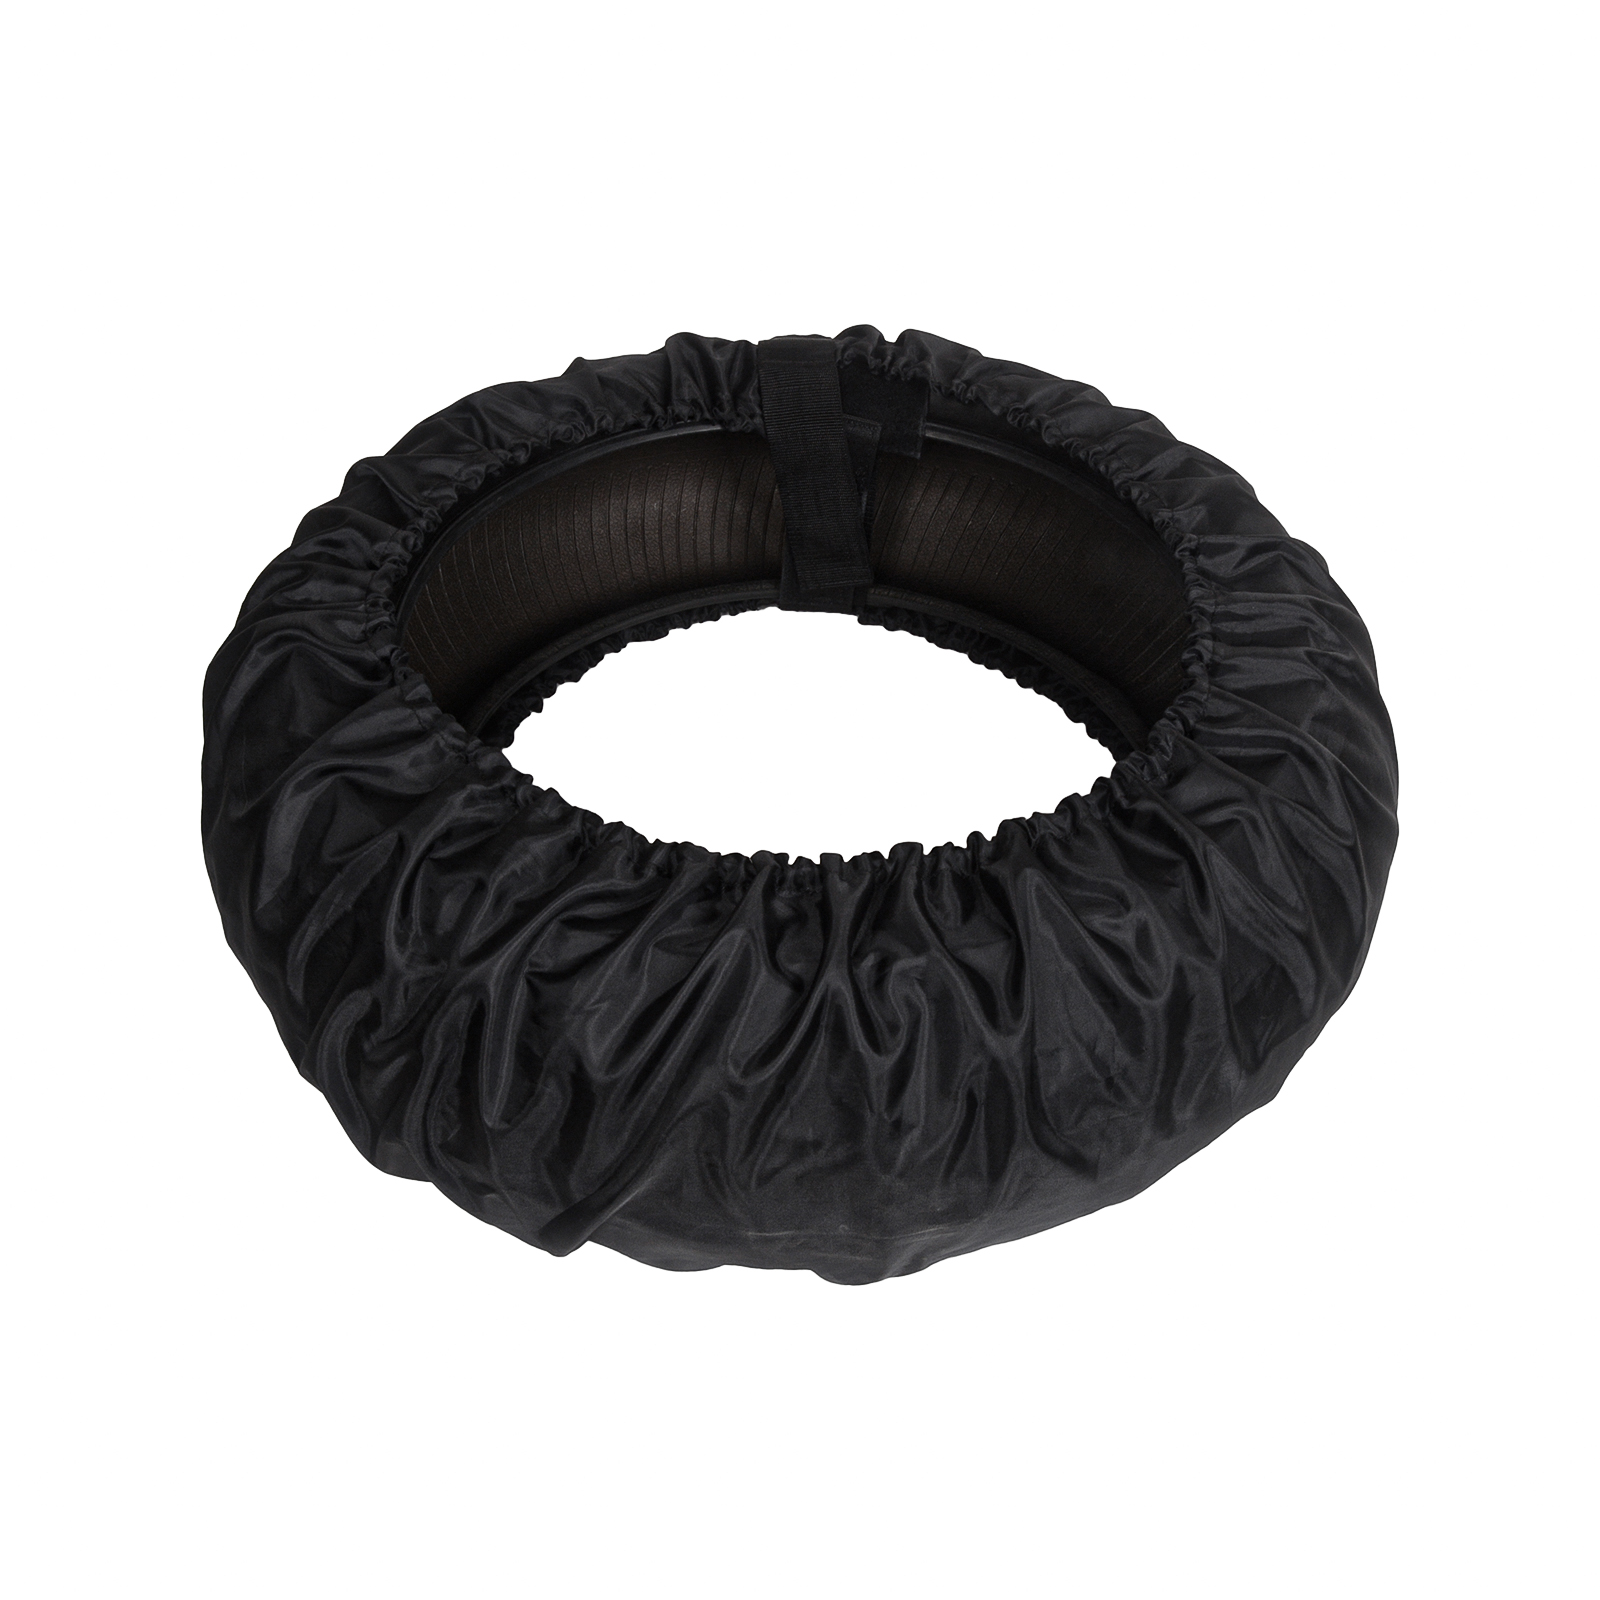 Motorcycle Wheel Dust Cover for 16-21 Inch Tires